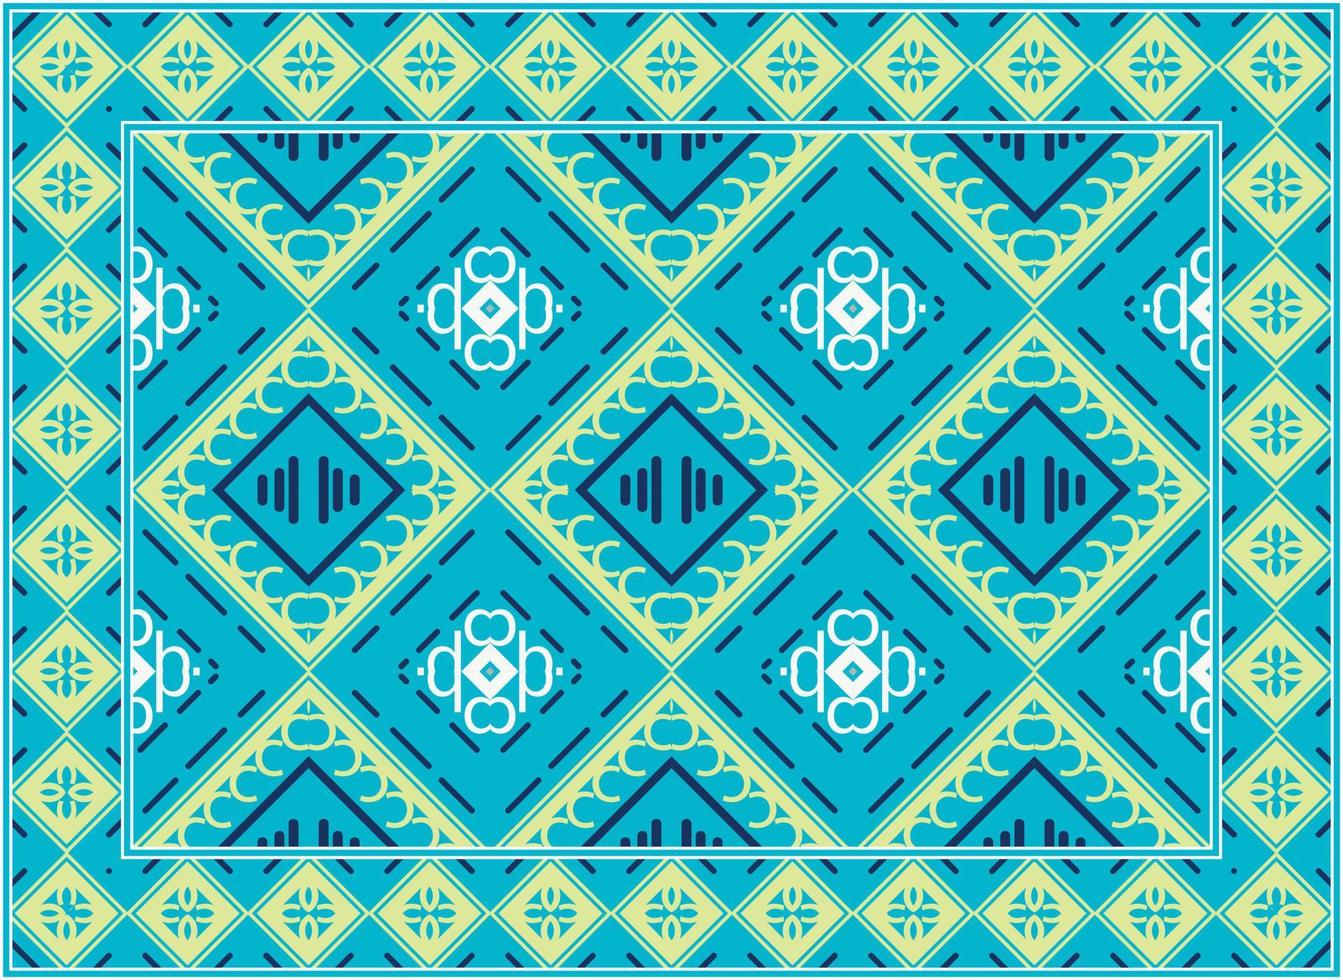 Modern oriental rugs, African Ethnic seamless pattern Scandinavian Persian rug modern African Ethnic Aztec style design for print fabric Carpets, towels, handkerchiefs, scarves rug, vector